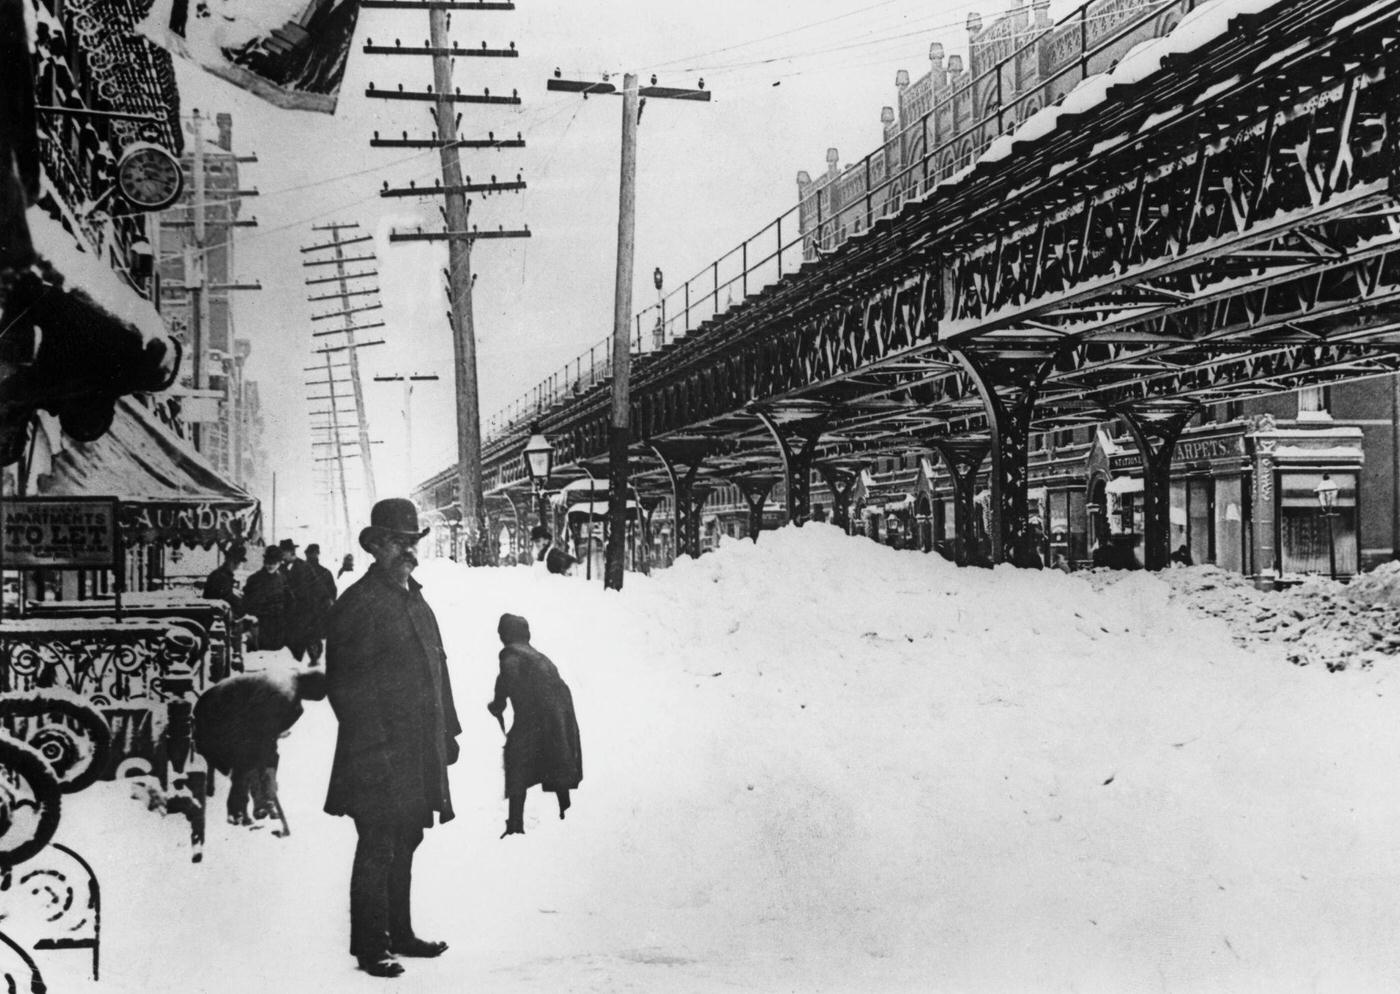 Children Clearing Snow On Third Avenue After The Blizzard, New York City, 1888